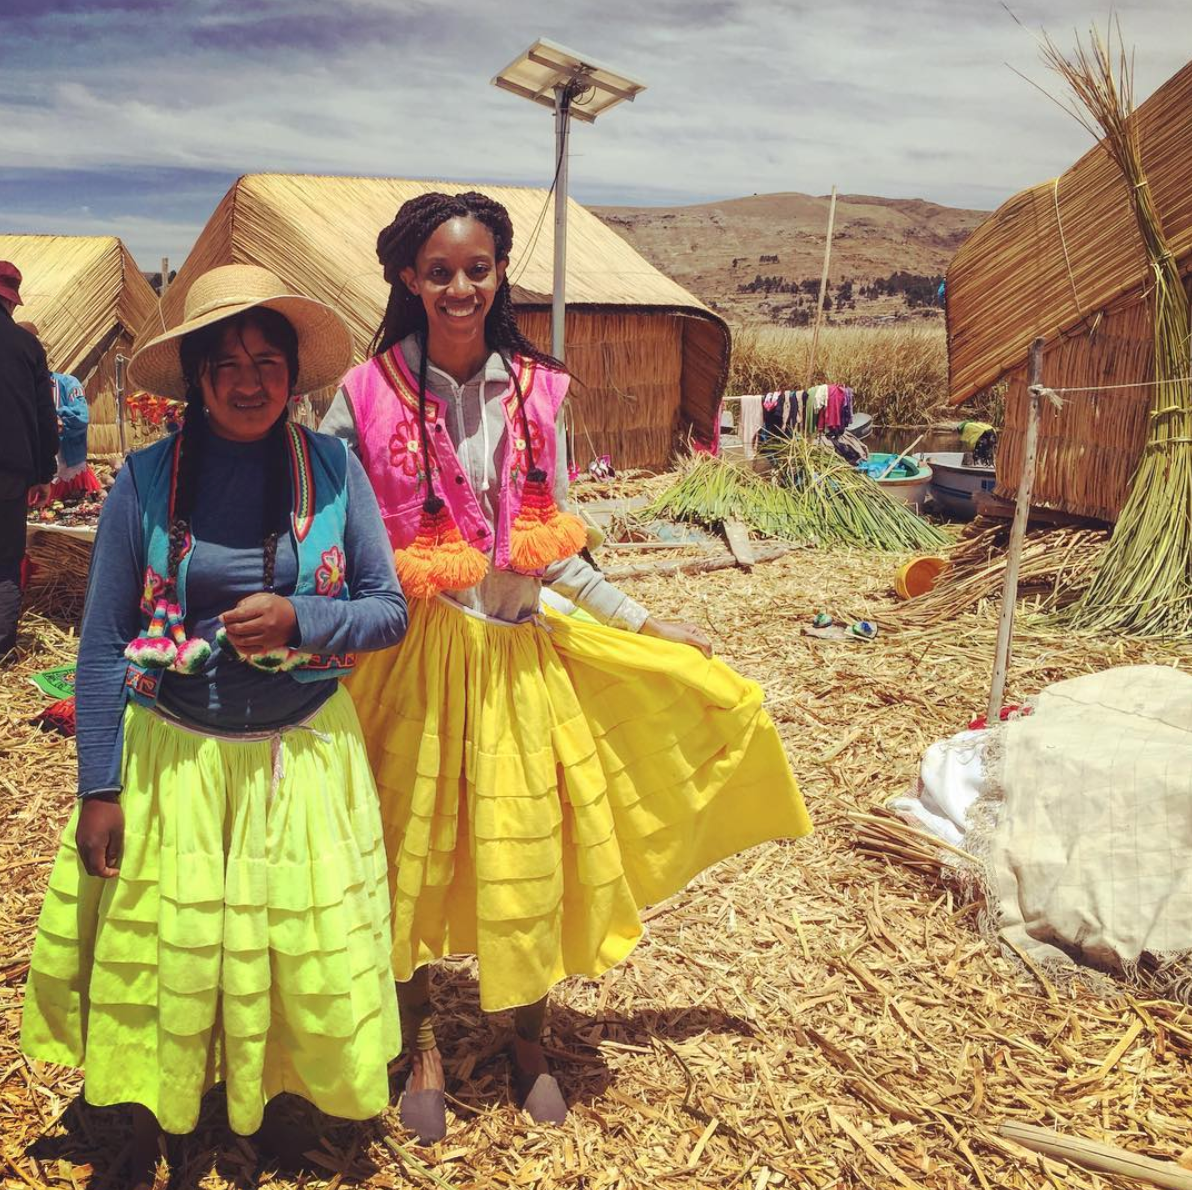 Black Travel Vibes: A Visit To Peru Will Take You To New Heights